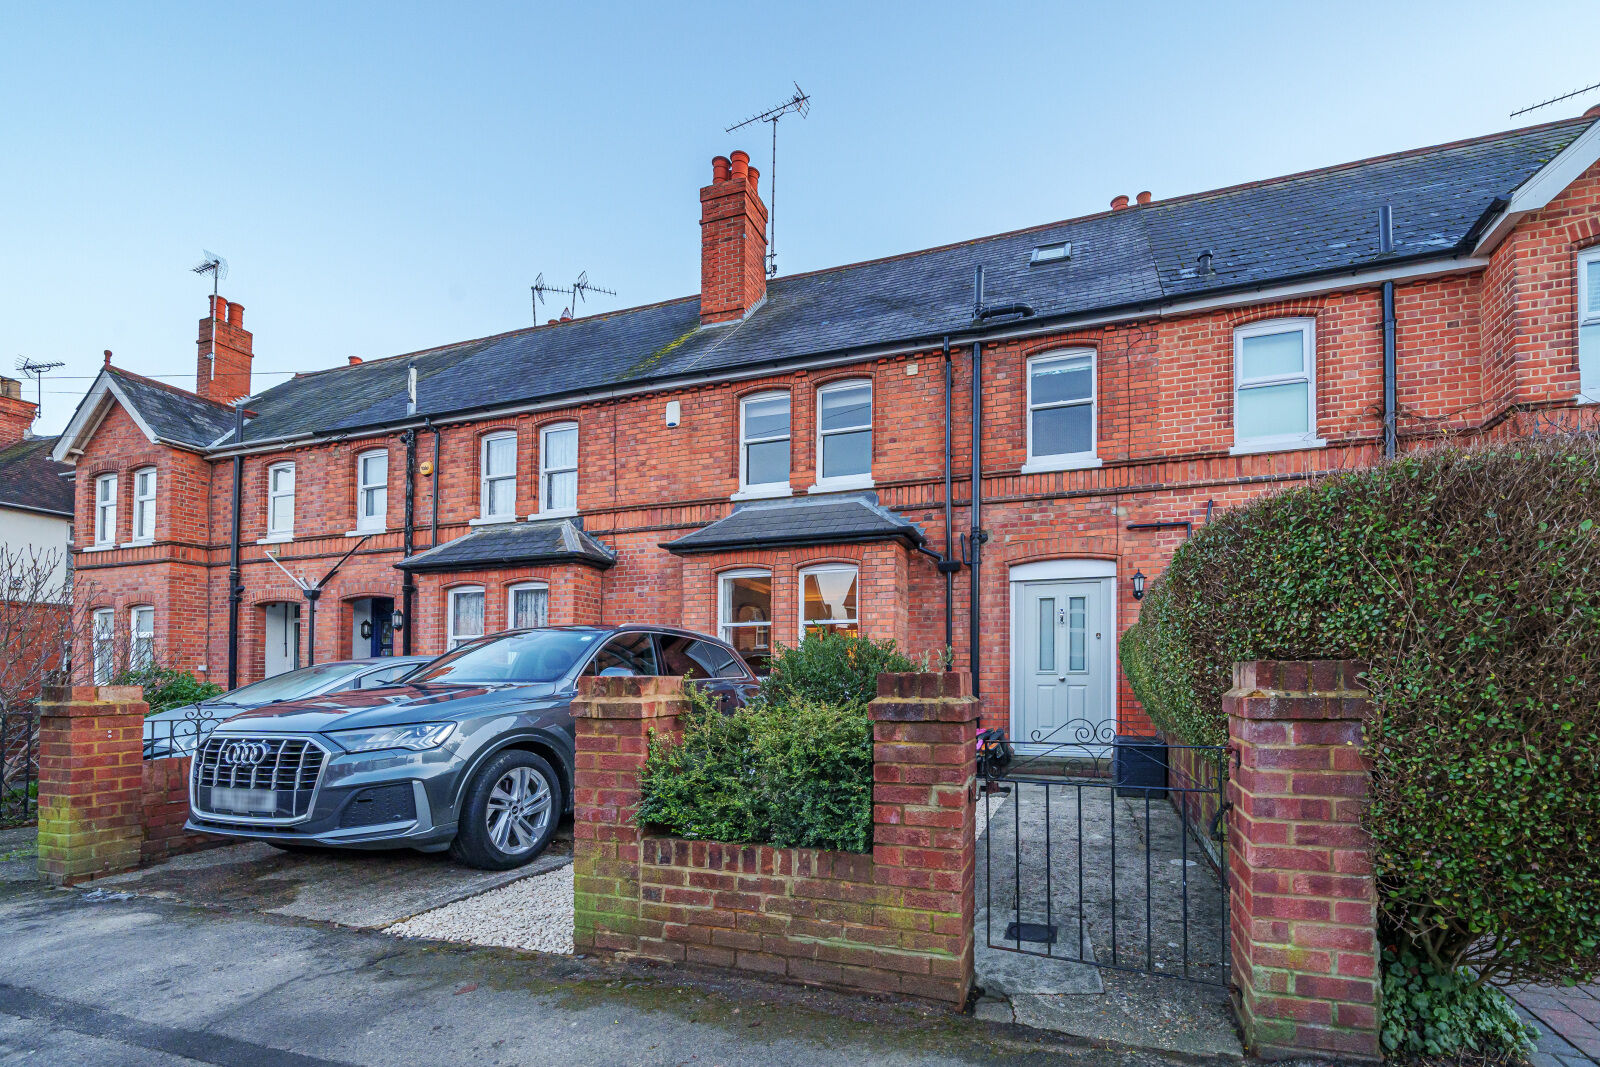 4 bedroom mid terraced house for sale South View Avenue, Caversham, RG4, main image